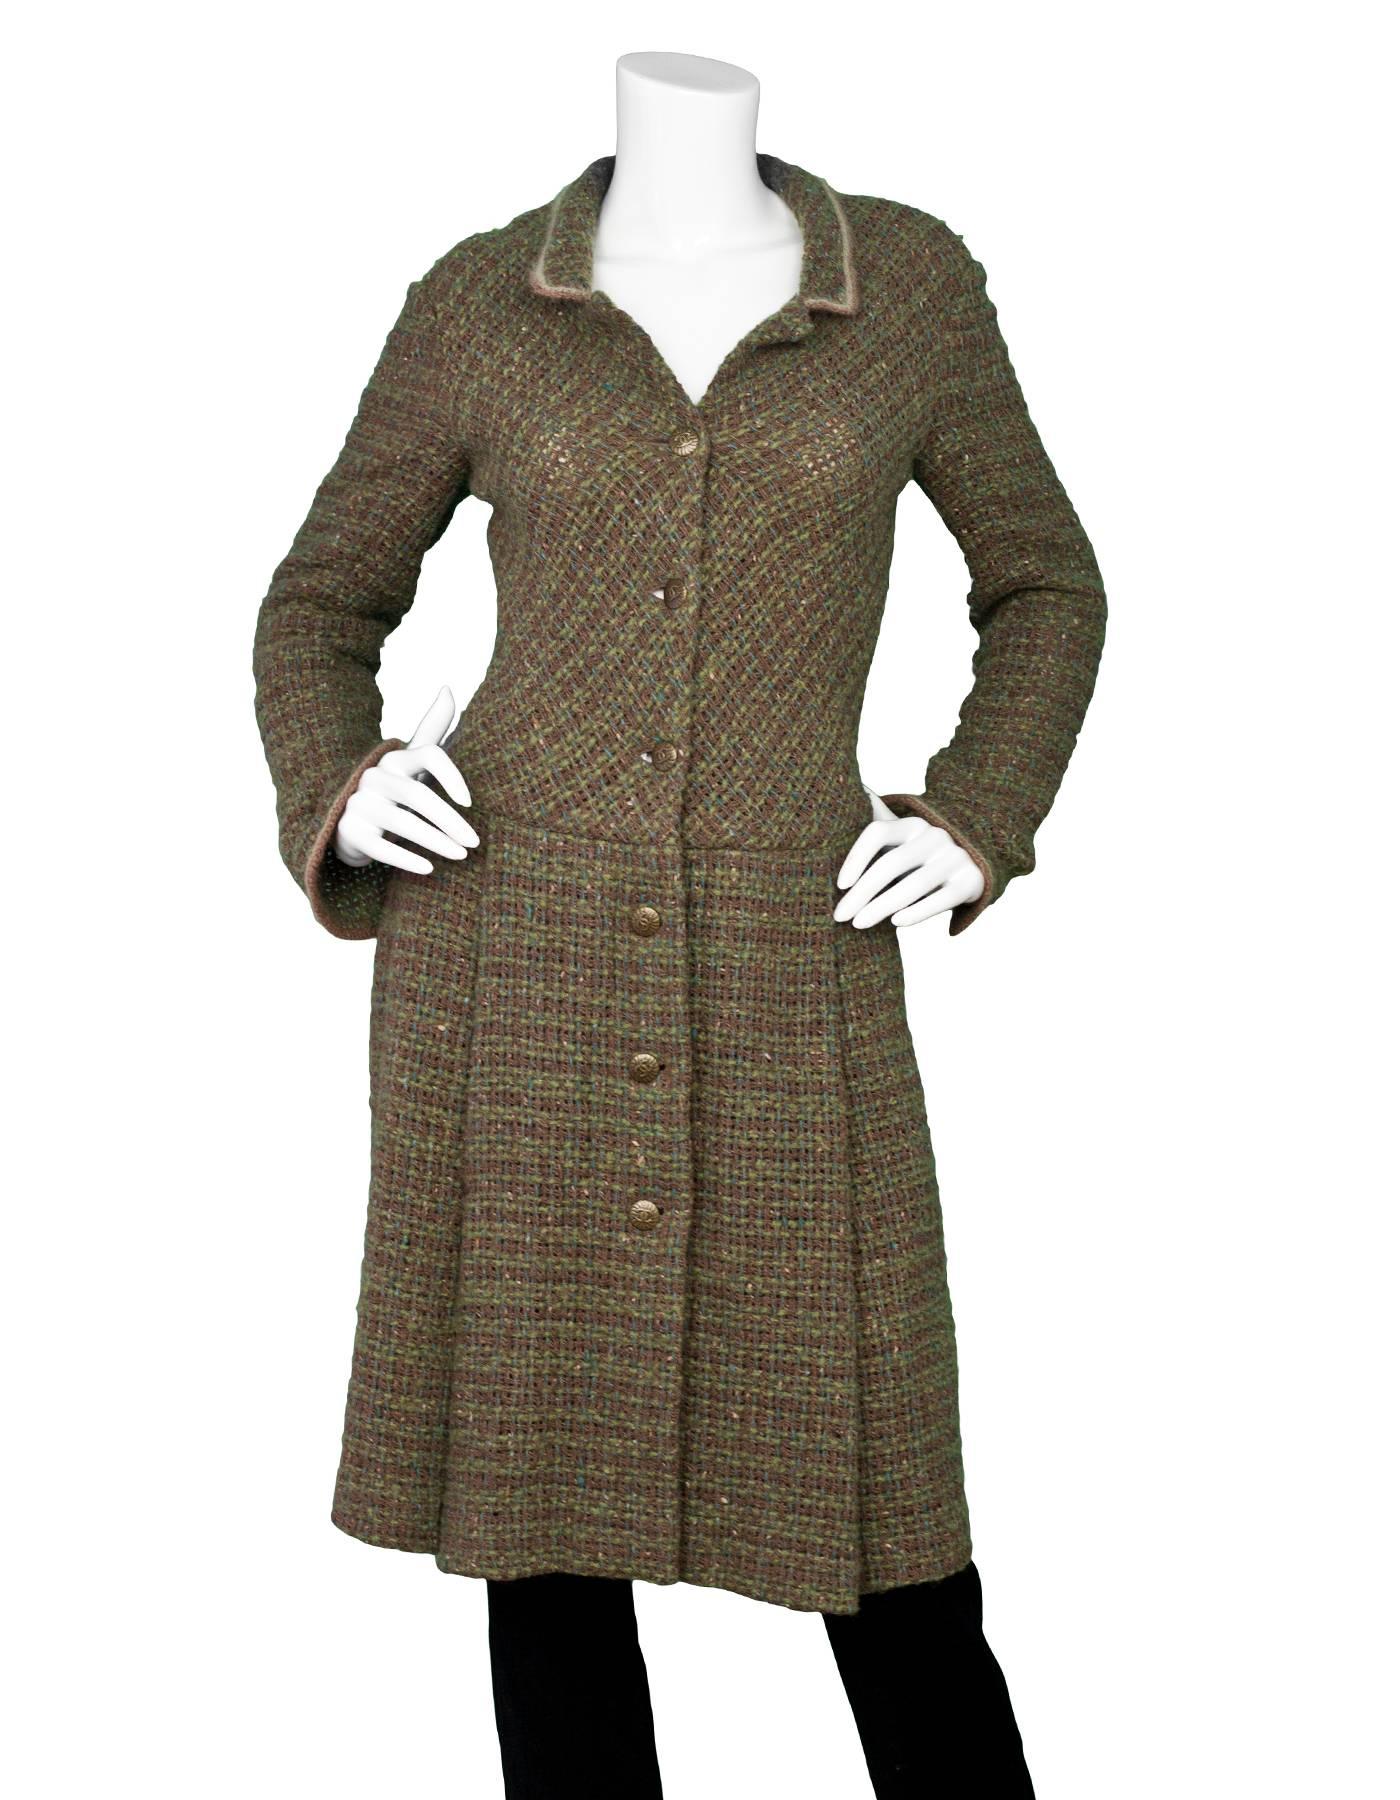 Chanel Green & Brown Wool Sweater Coat Sz FR40

Made In: France
Year Of Production: 1998 Autumn
Color: Browm, green
Composition: 66% wool, 18% nylon, 8% acrylic, 8% mohair
Lining: Green wool
Closure/Opening: button closure
Overall Condition: Very